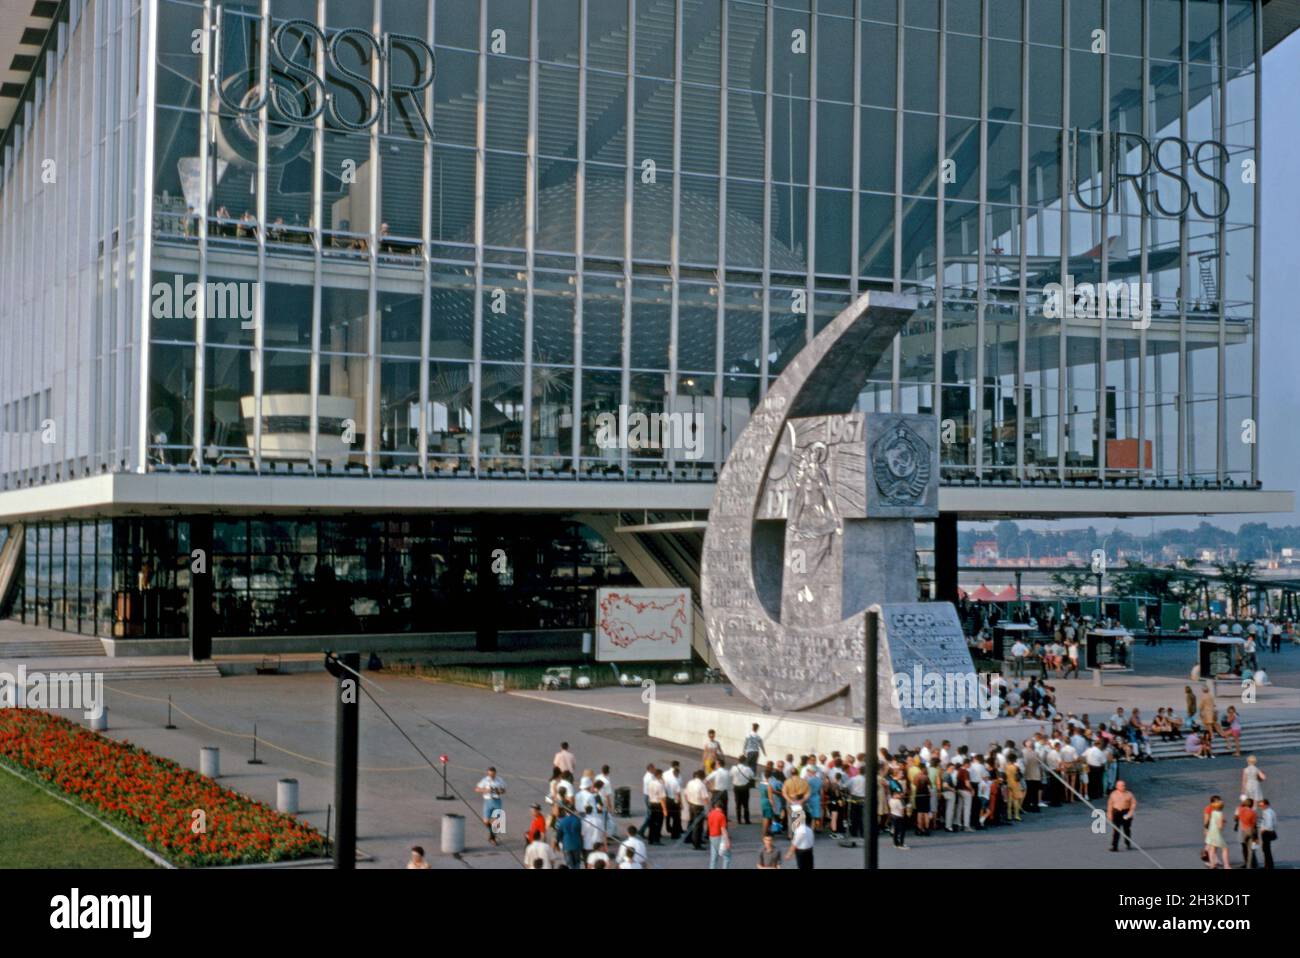 The USSR pavilion (Soviet Union, URSS or Moscow Pavilion) at Expo 67, Montreal, Quebec, Canada in 1967. It was designed by a team of architects led by Mikhail Posokhin. In front is a huge monumental sculpture of the symbol of Soviet Union, the hammer and the sickle. Since the 1990s the steel and glass pavilion has been best known as the Moscow Pavilion. This image is from an old amateur Kodak colour transparency – a vintage 1960s photograph. Stock Photo